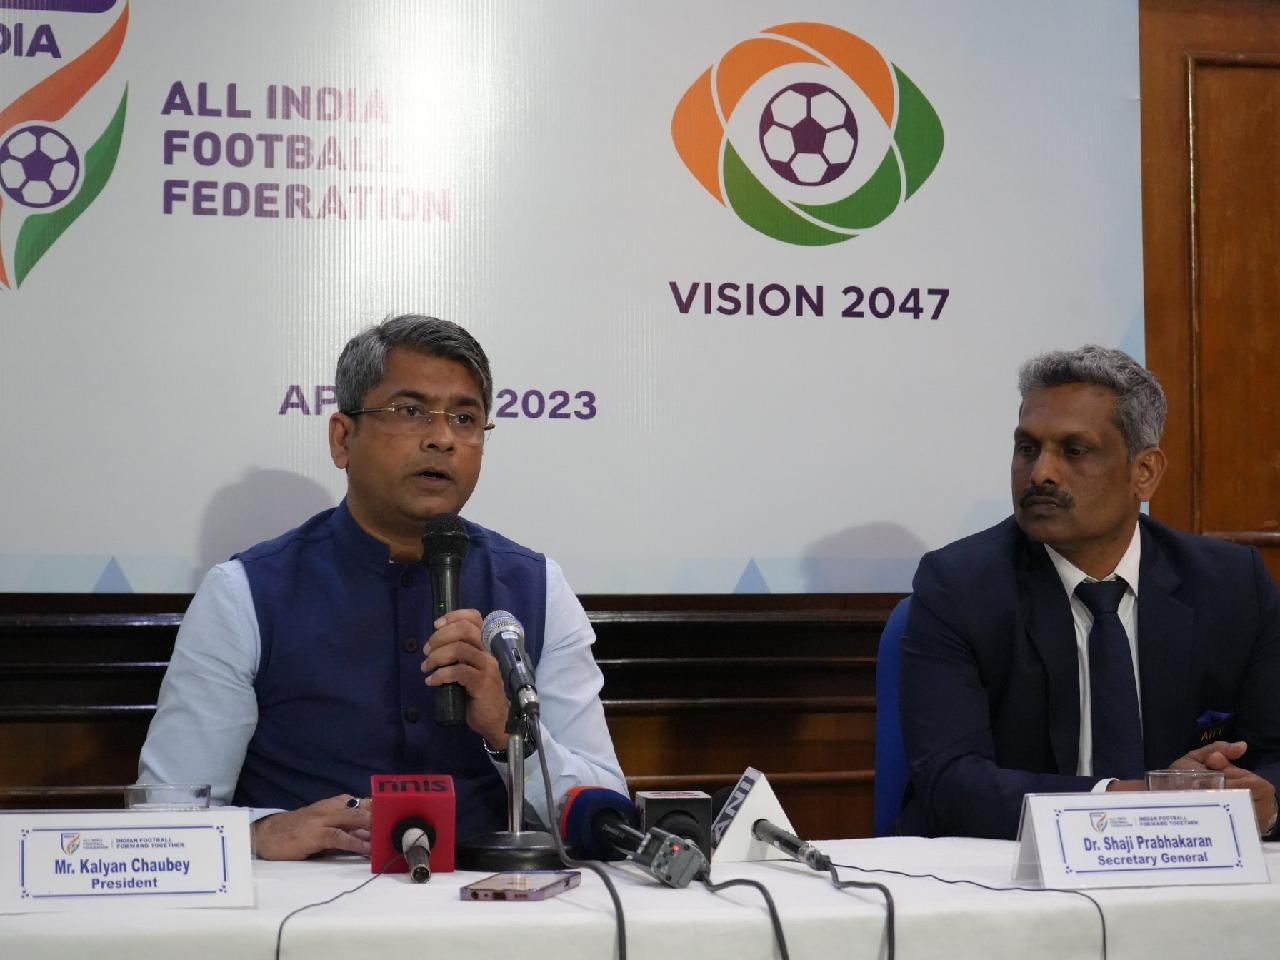 ISL wants to have 16 teams before implementing relegation: AIFF president Kalyan Chaubey